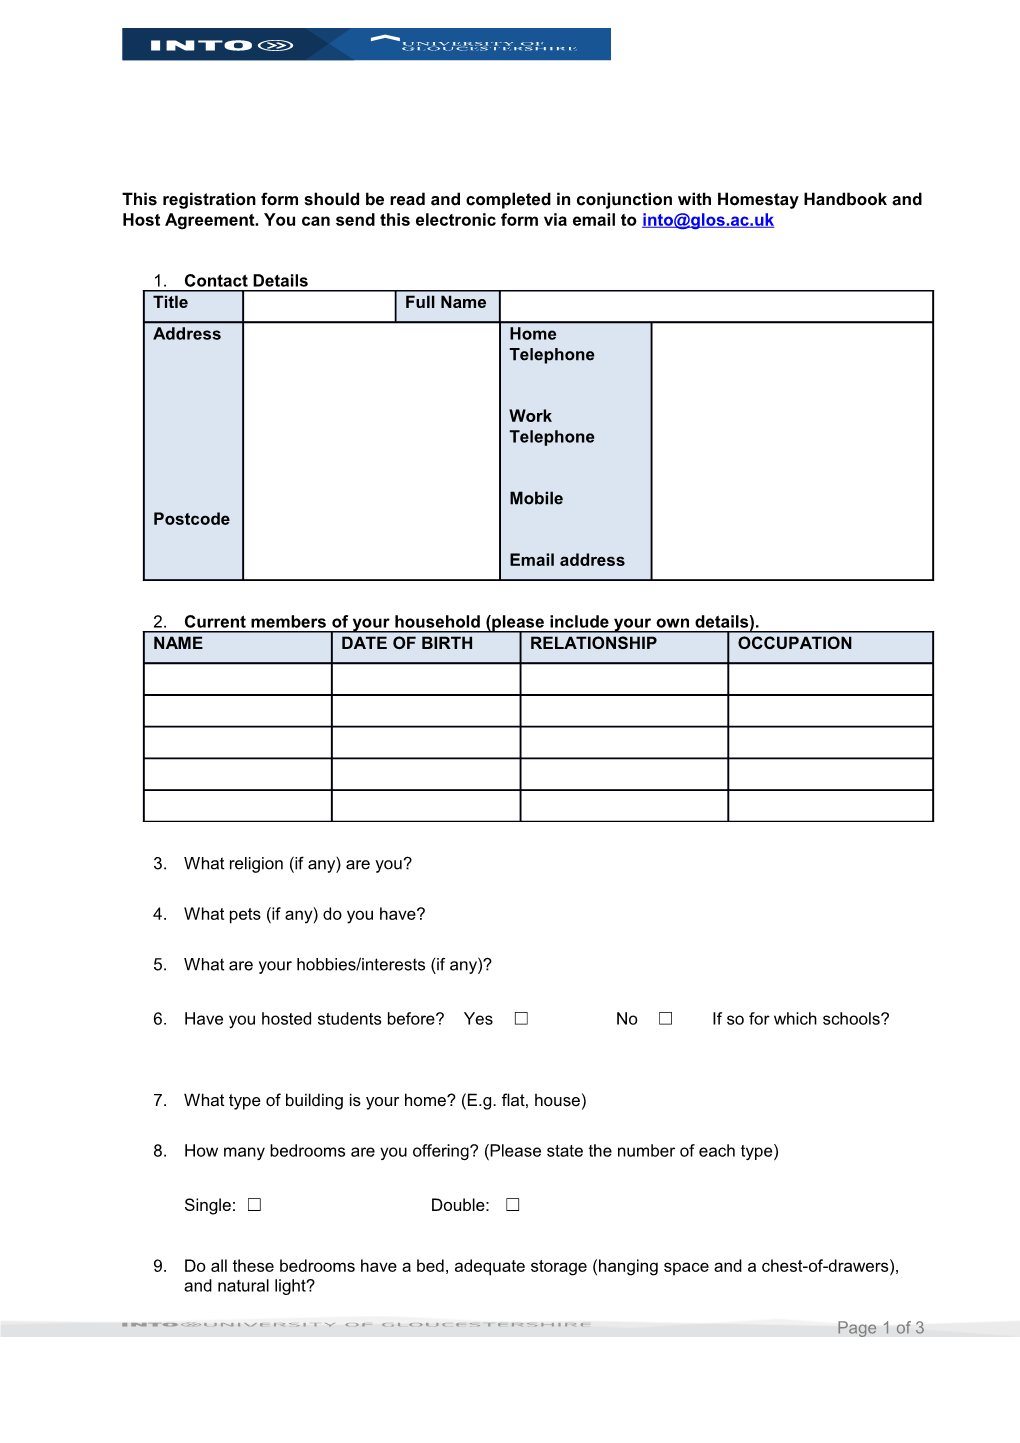 Registration Form to Become a Homestay Host